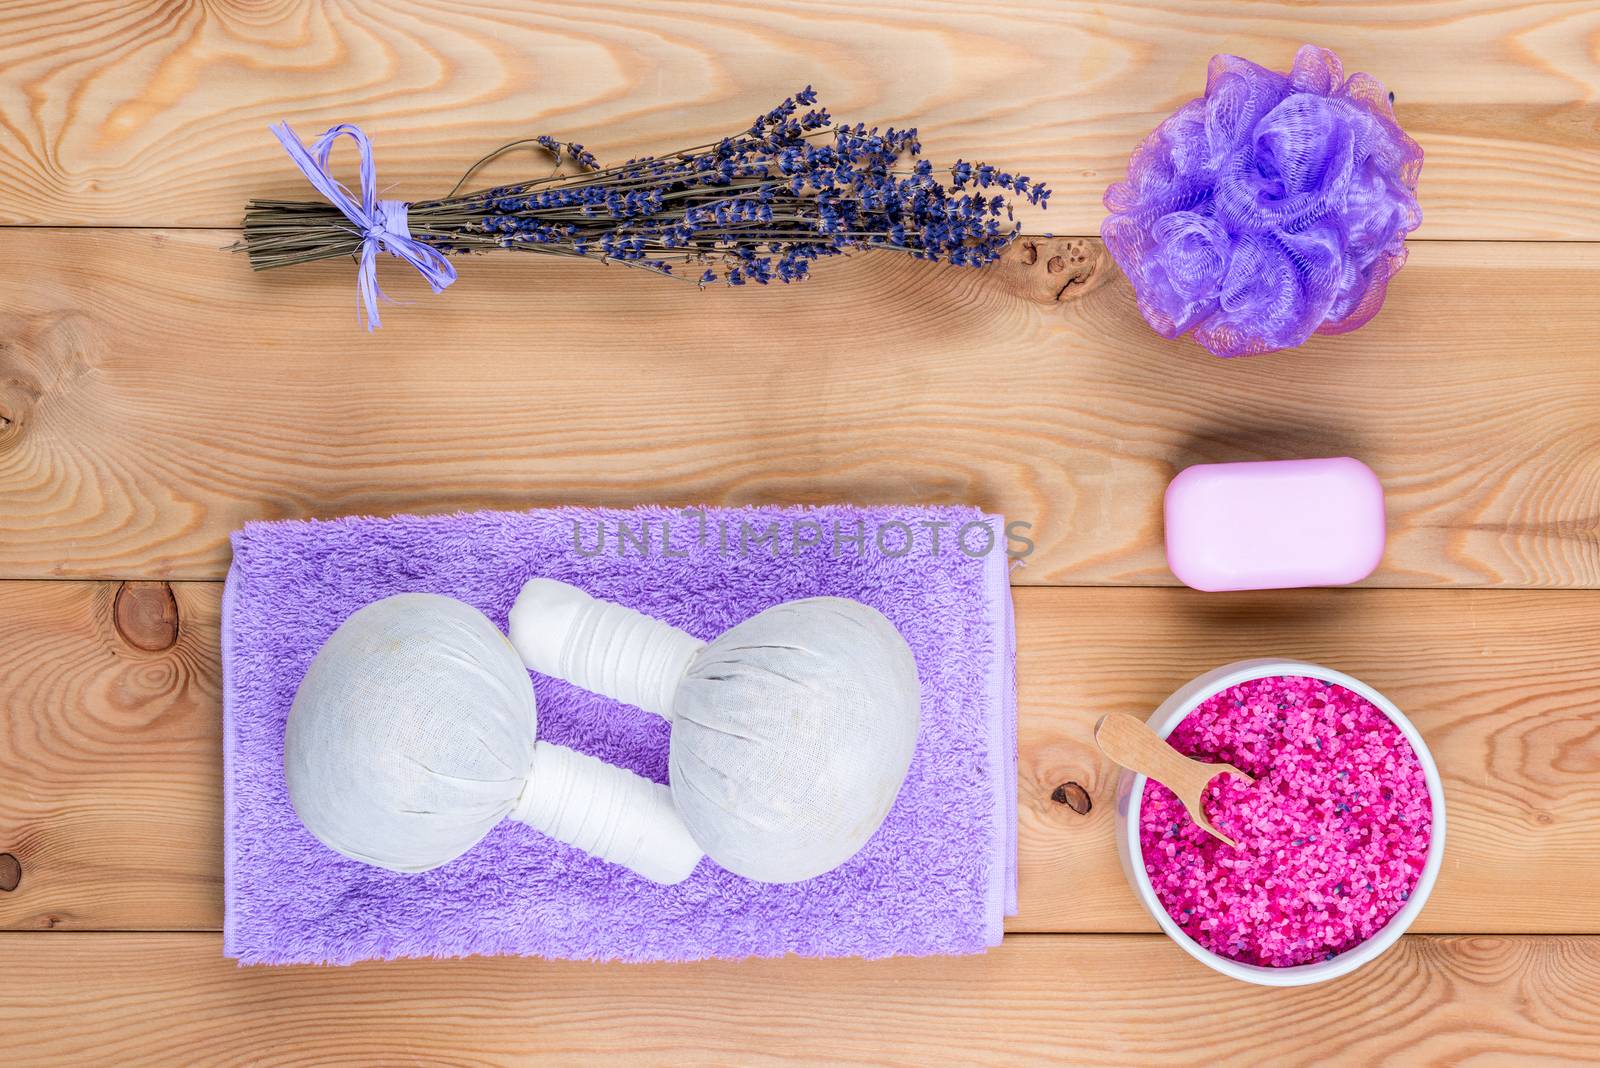 Lavender on wooden planks and cosmetics for massage, relaxation by kosmsos111